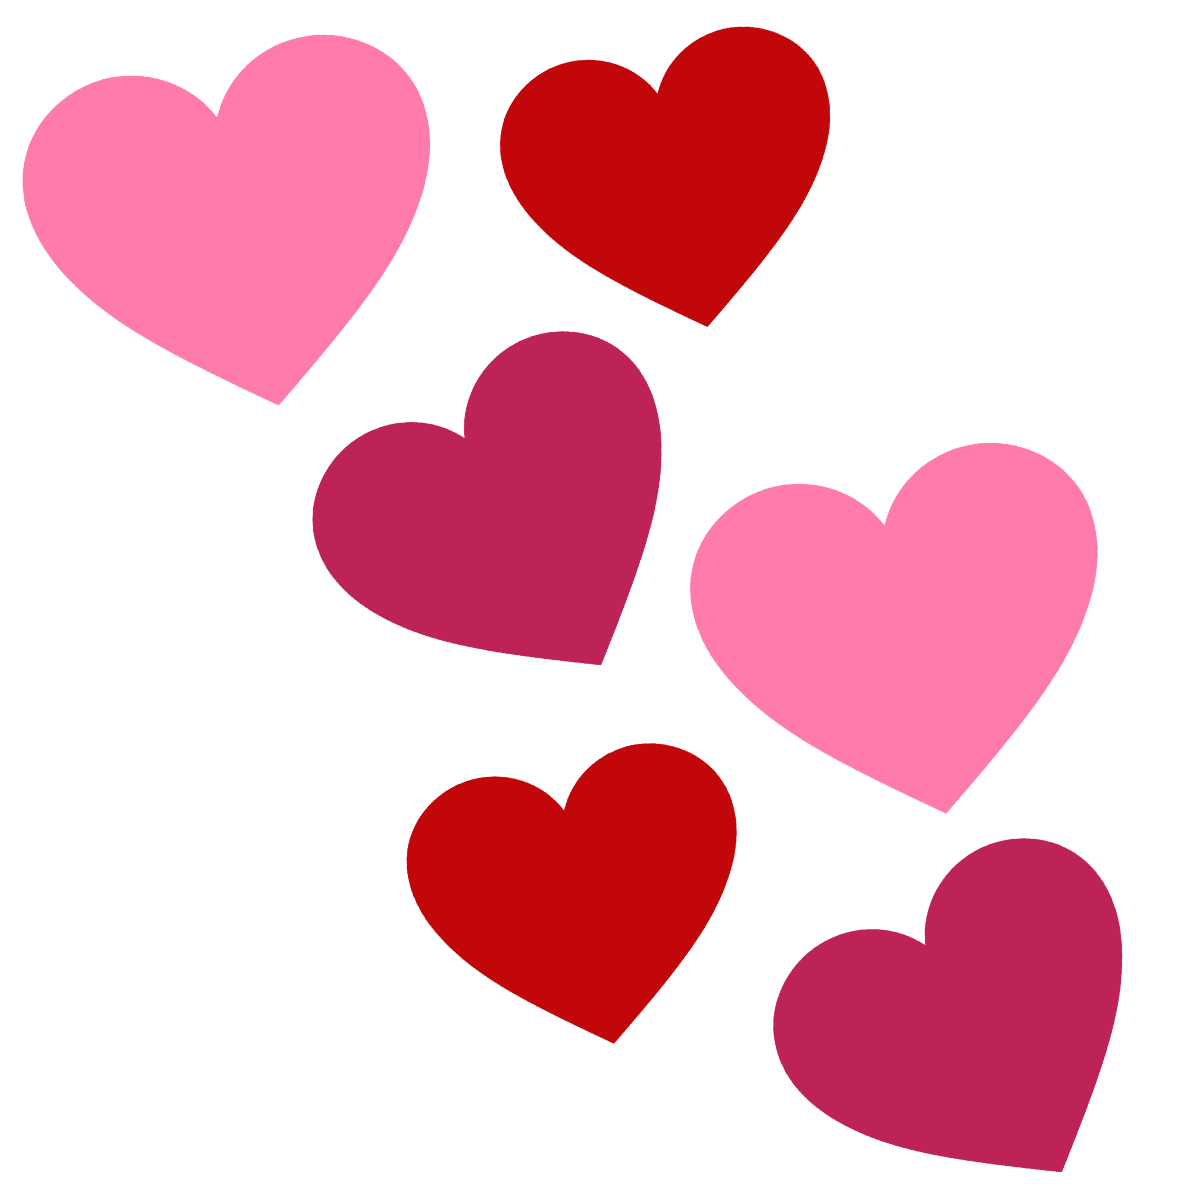 Two Heart Images Clipart Hear